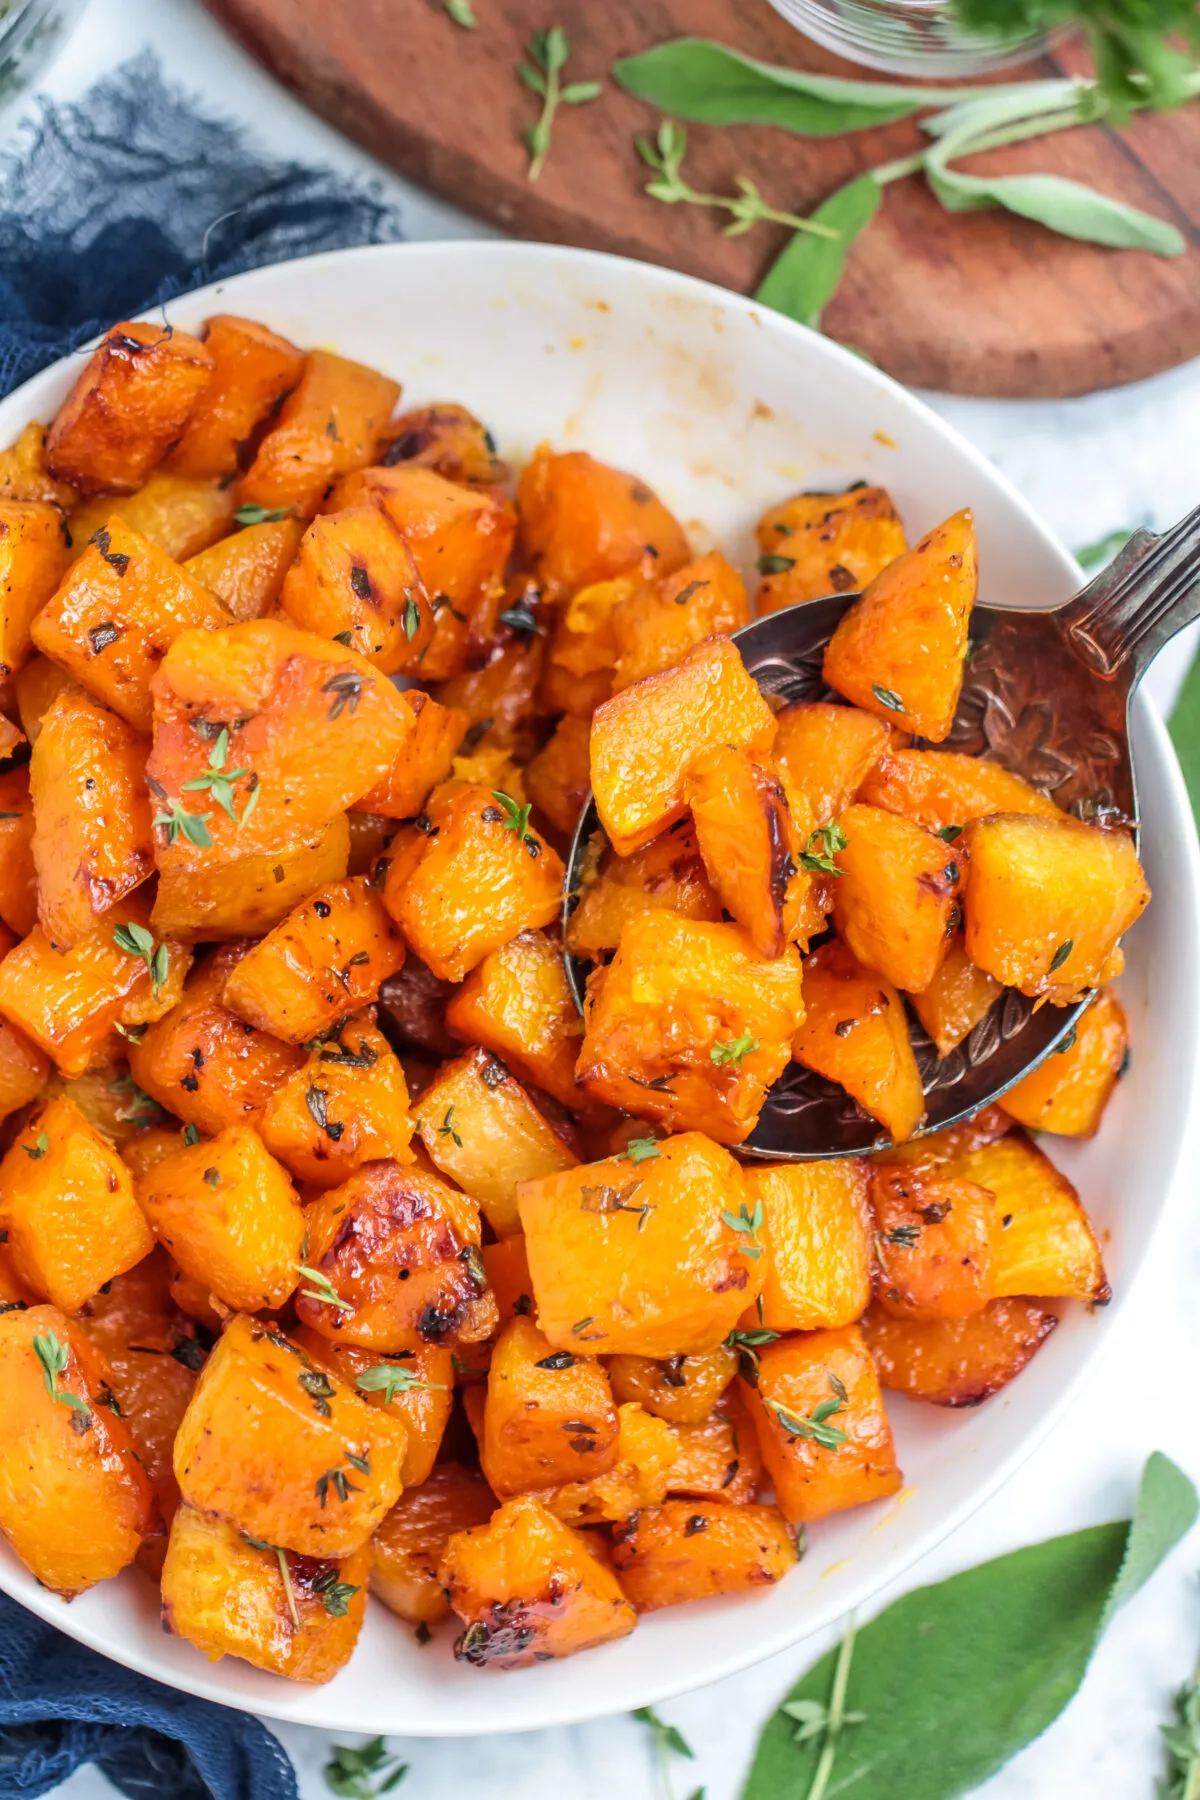 Roasted butternut squash with brown sugar and herbs is a tasty side dish for any fall menu. You will love this perfectly caramelized squash!